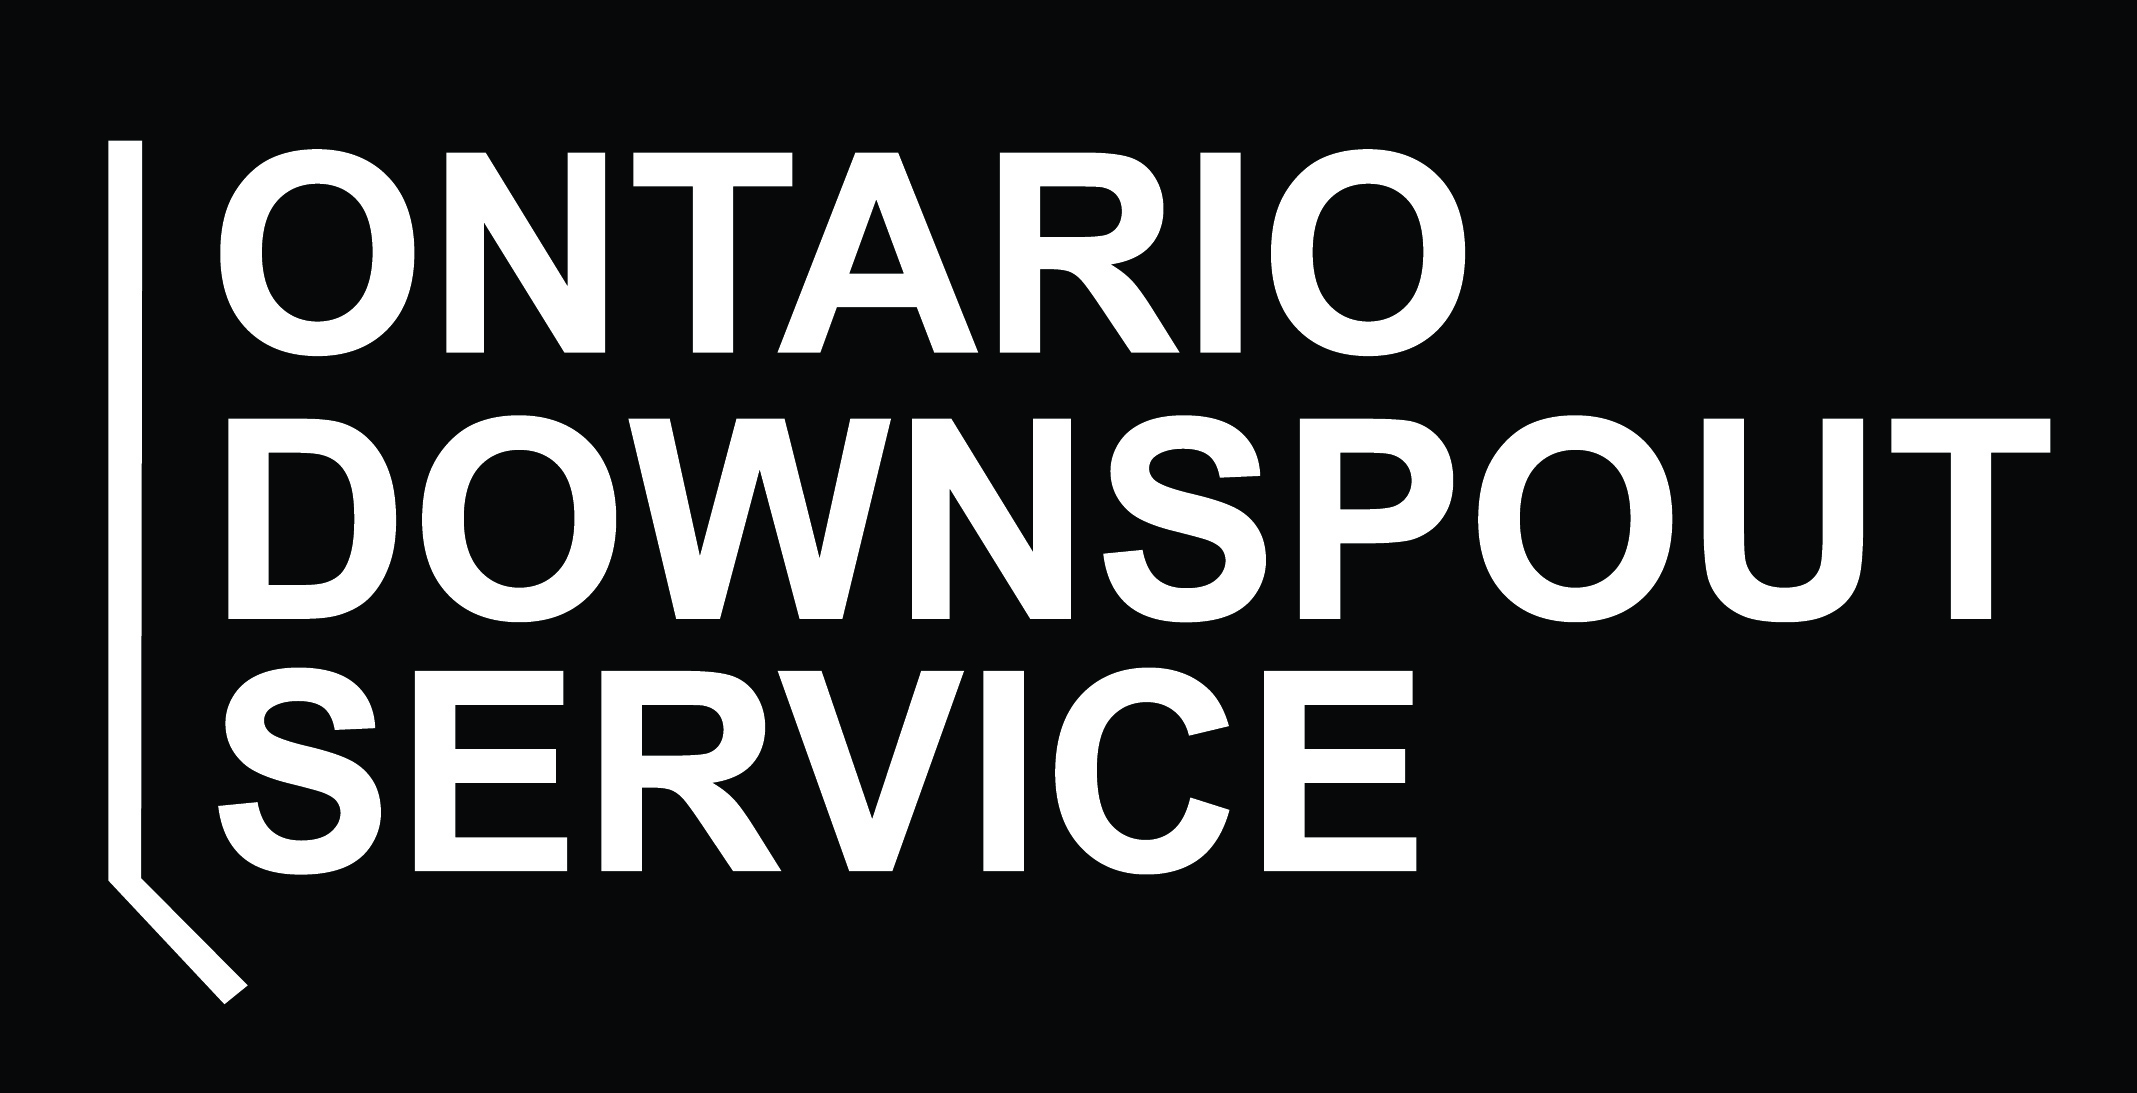 Ontario Downspout Service